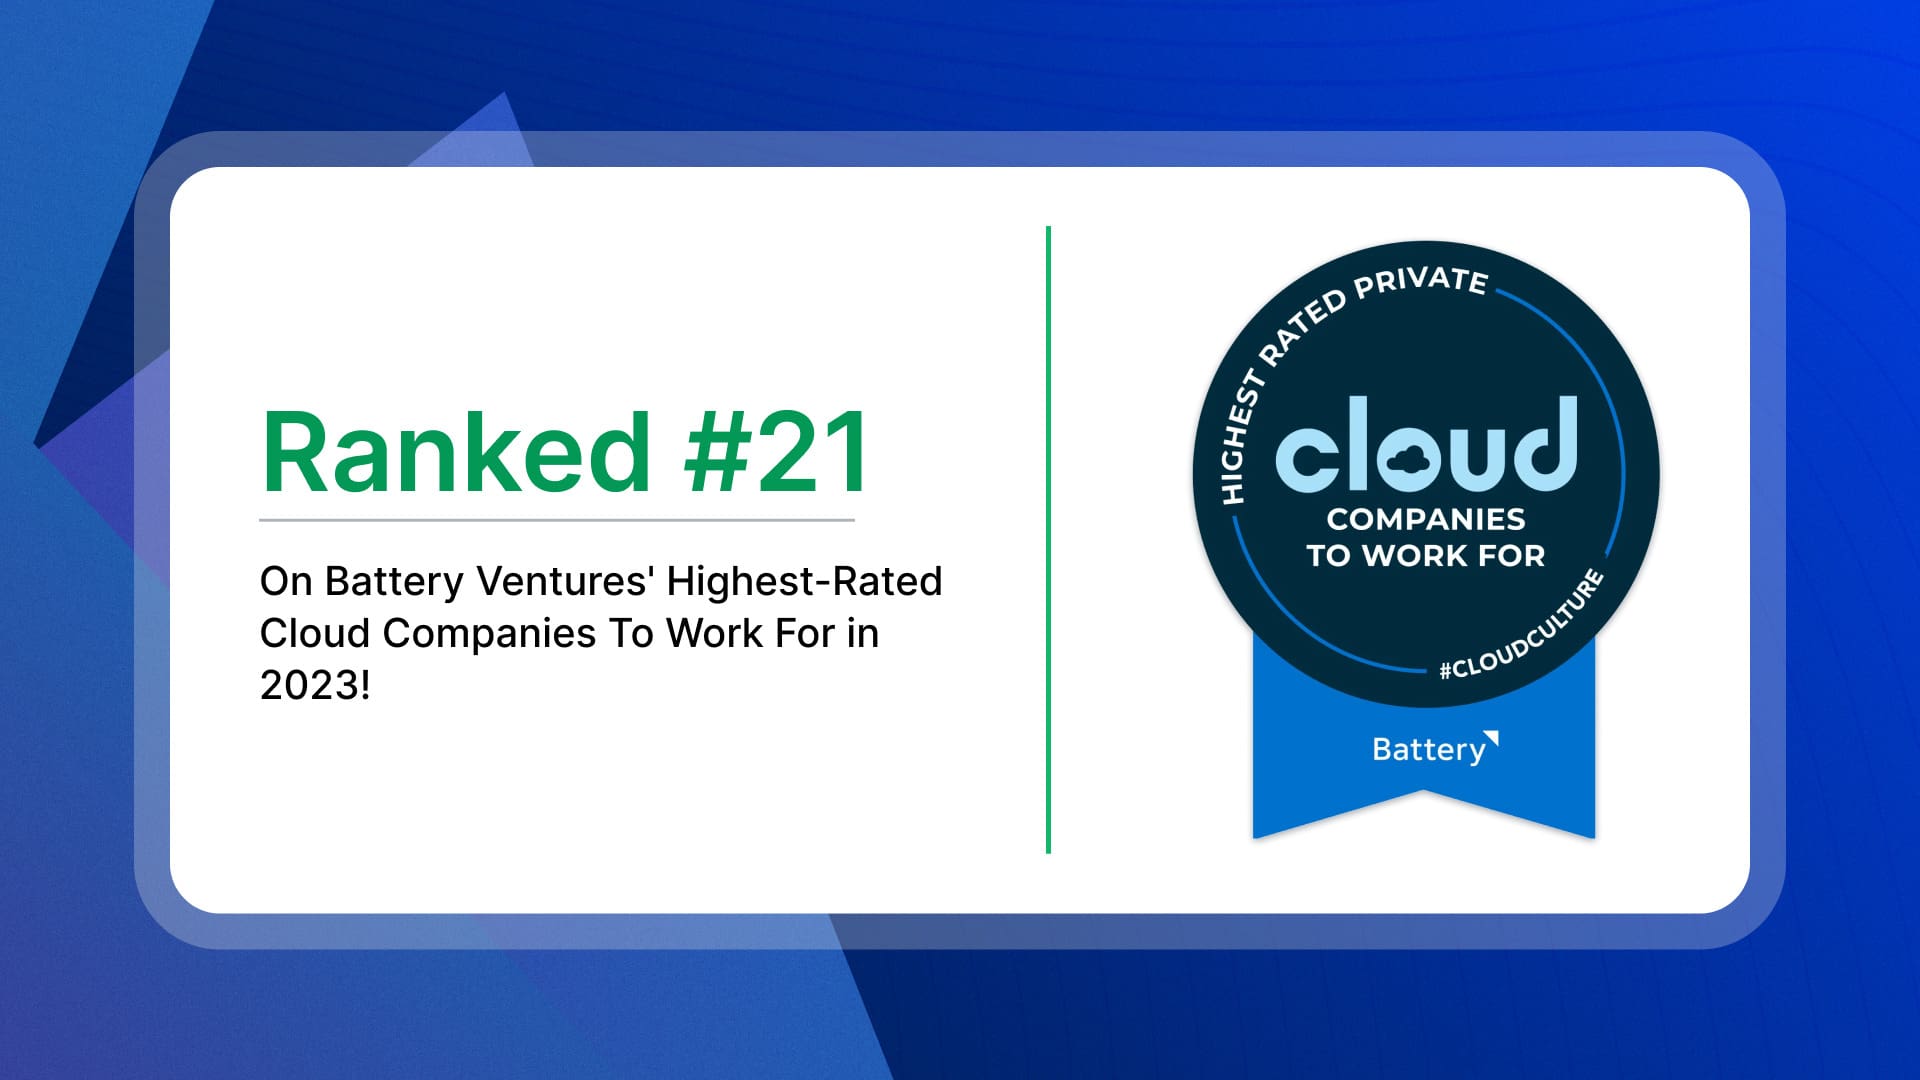 SaaS Labs Honored Among Battery Ventures’ 2023 Highest-Rated Cloud Companies To Work For!